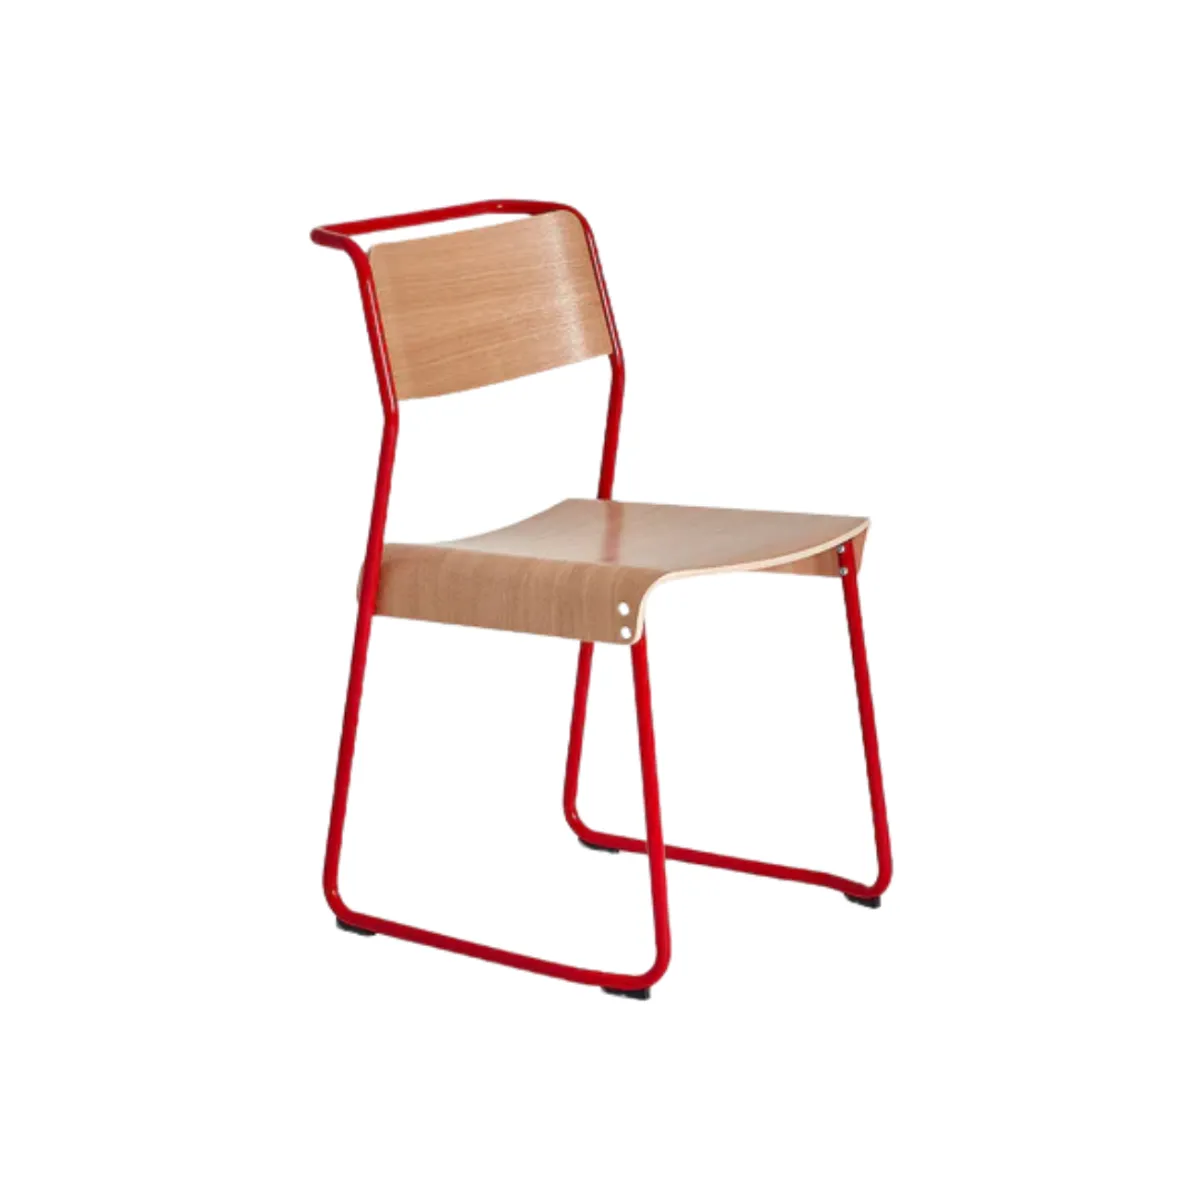 Utility side chair 1